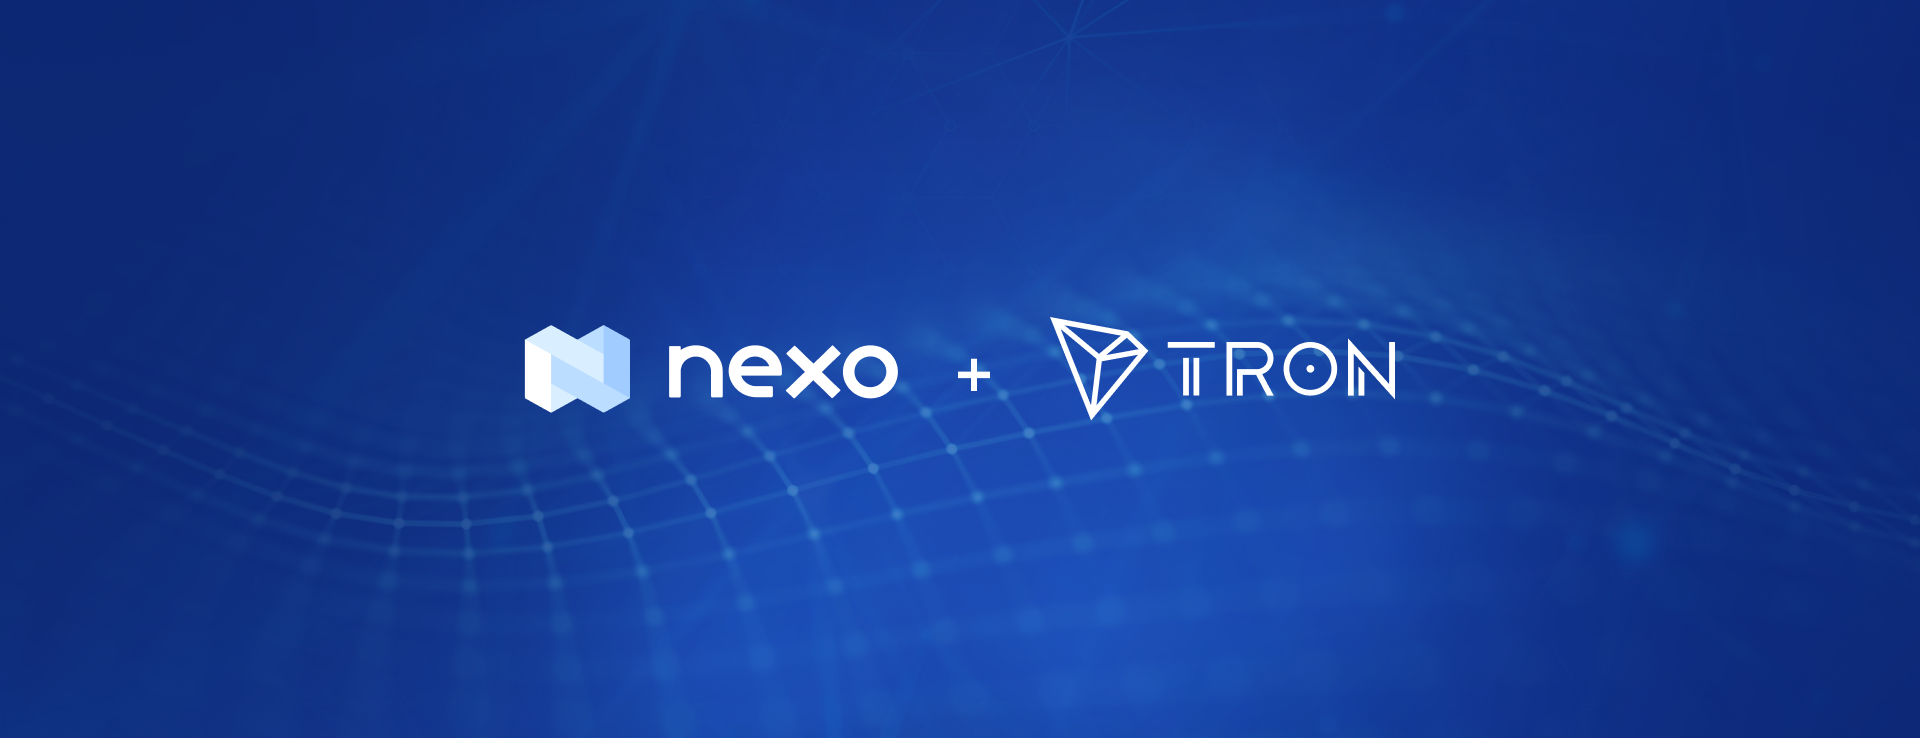 TRON Users May Now Take out First-ever TRX-backed Fiat Loans with Nexo